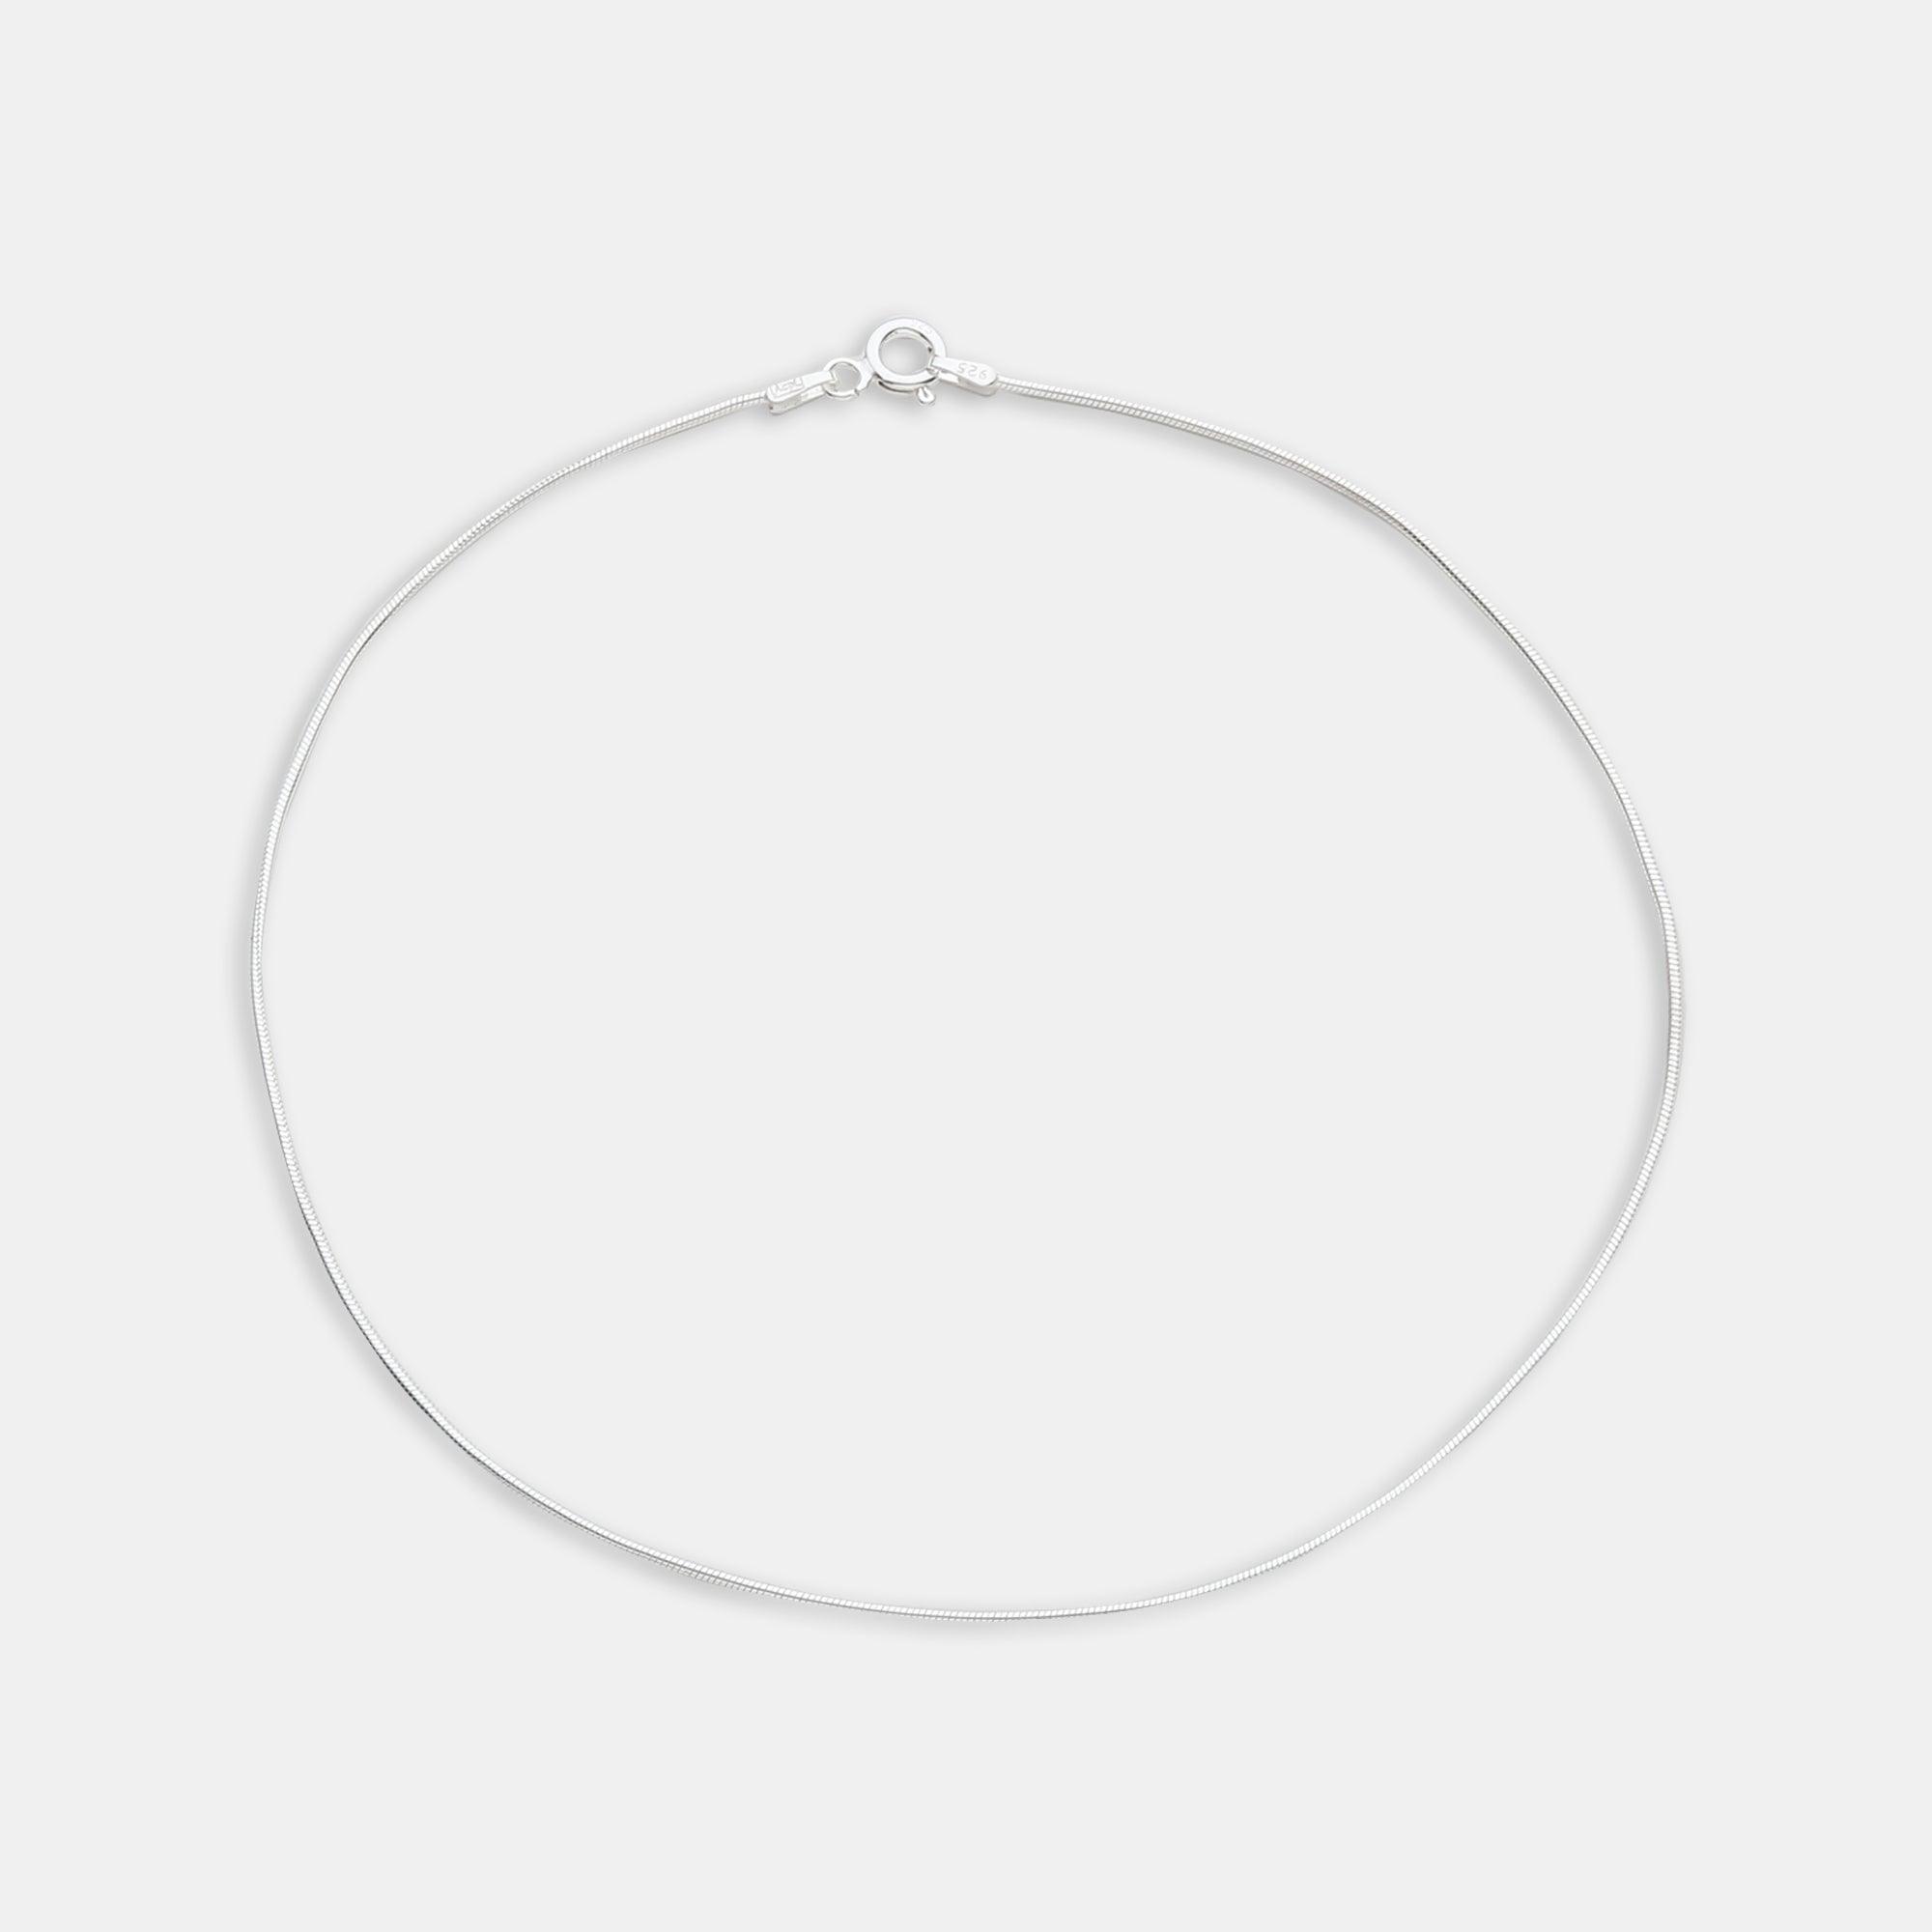 Summer Styles Simple Chain Anklet - silvermark